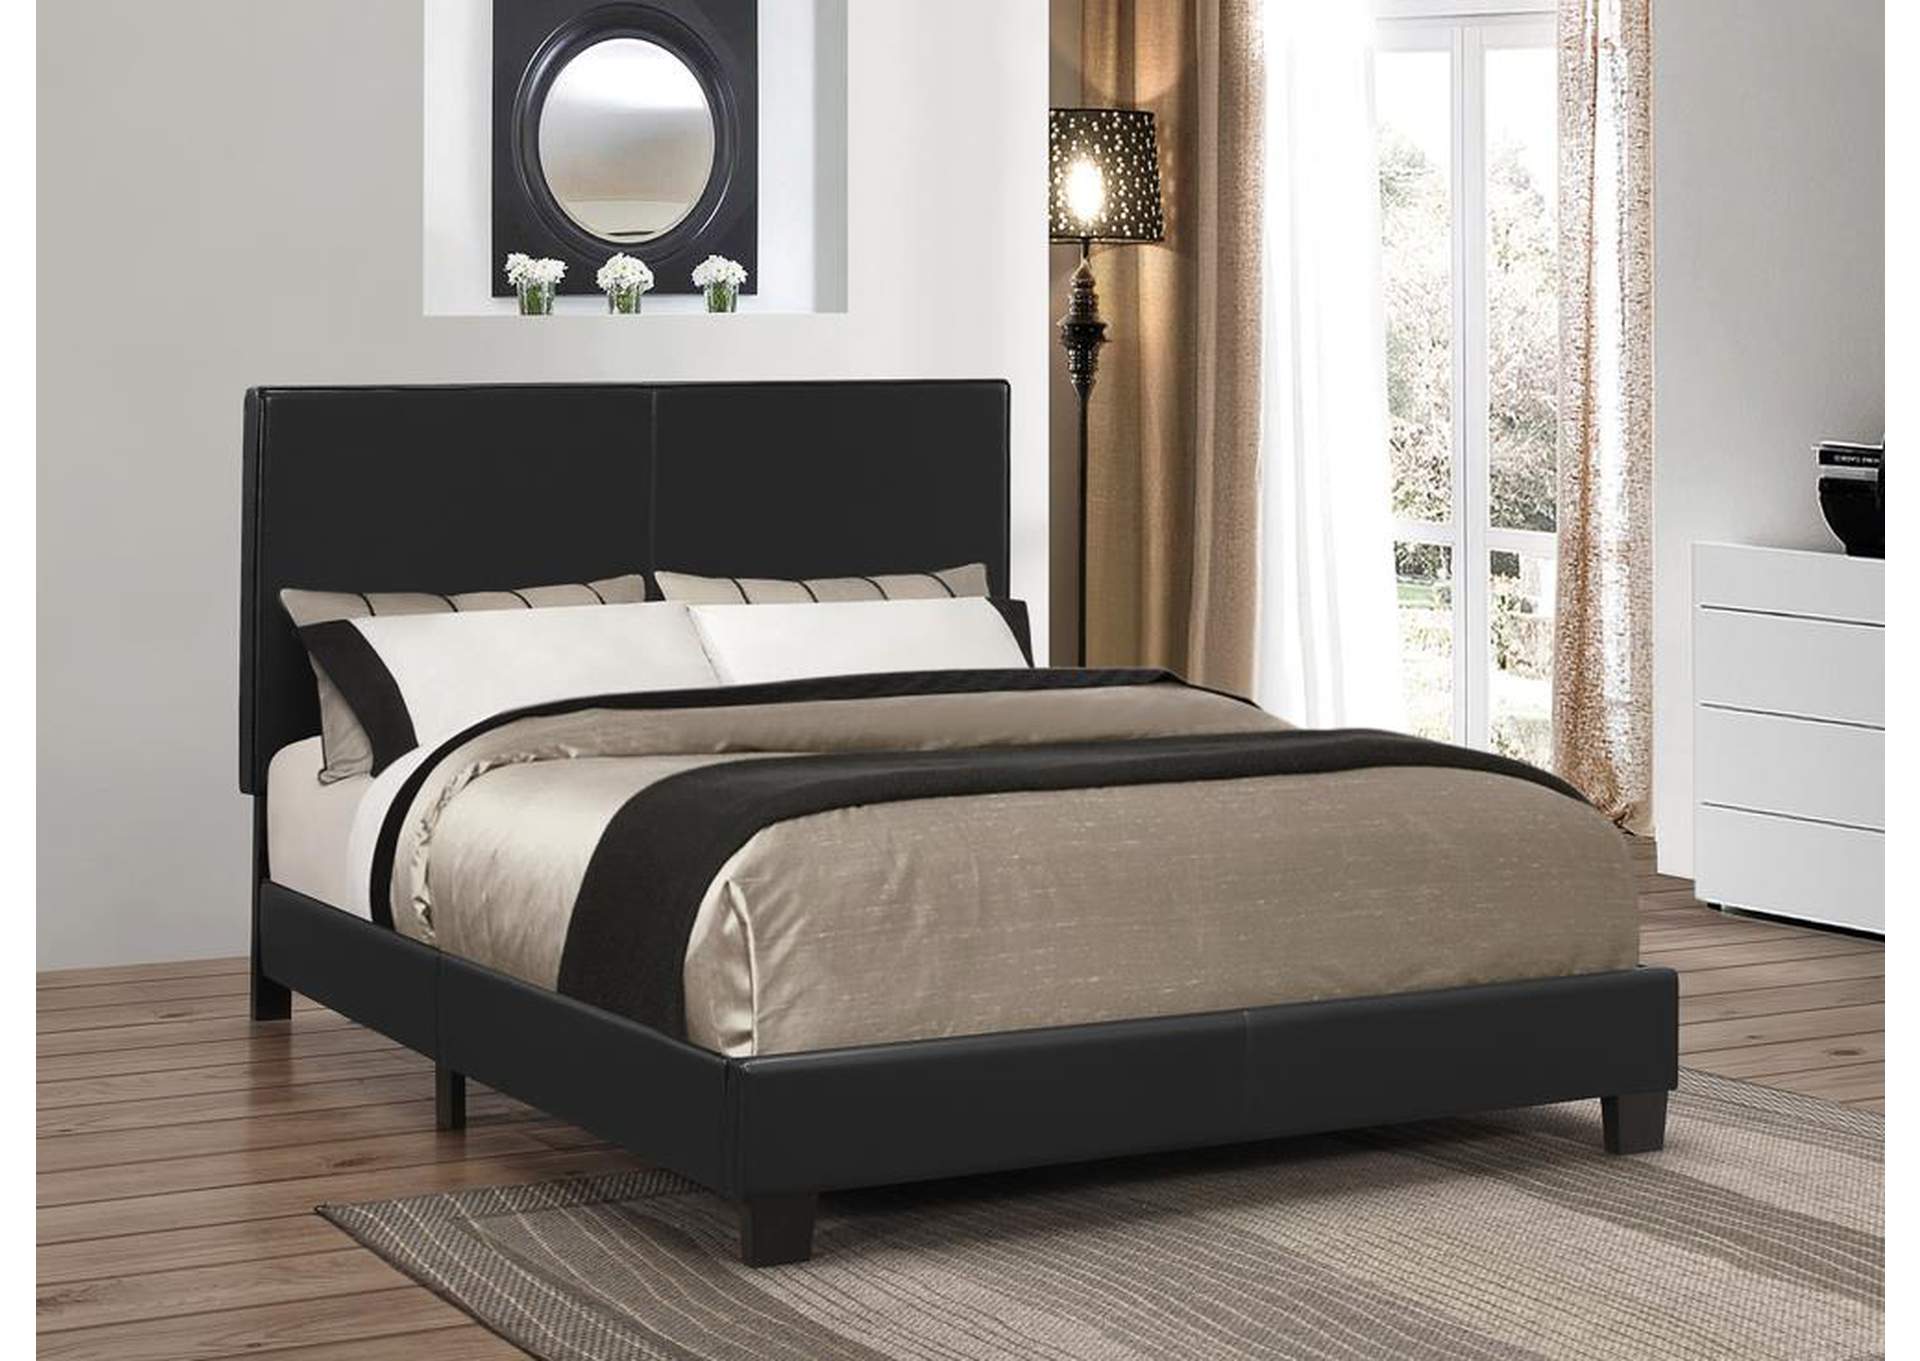 Bedroom Furniture Stores Austin Tx In Austin Right Now 5 Best New